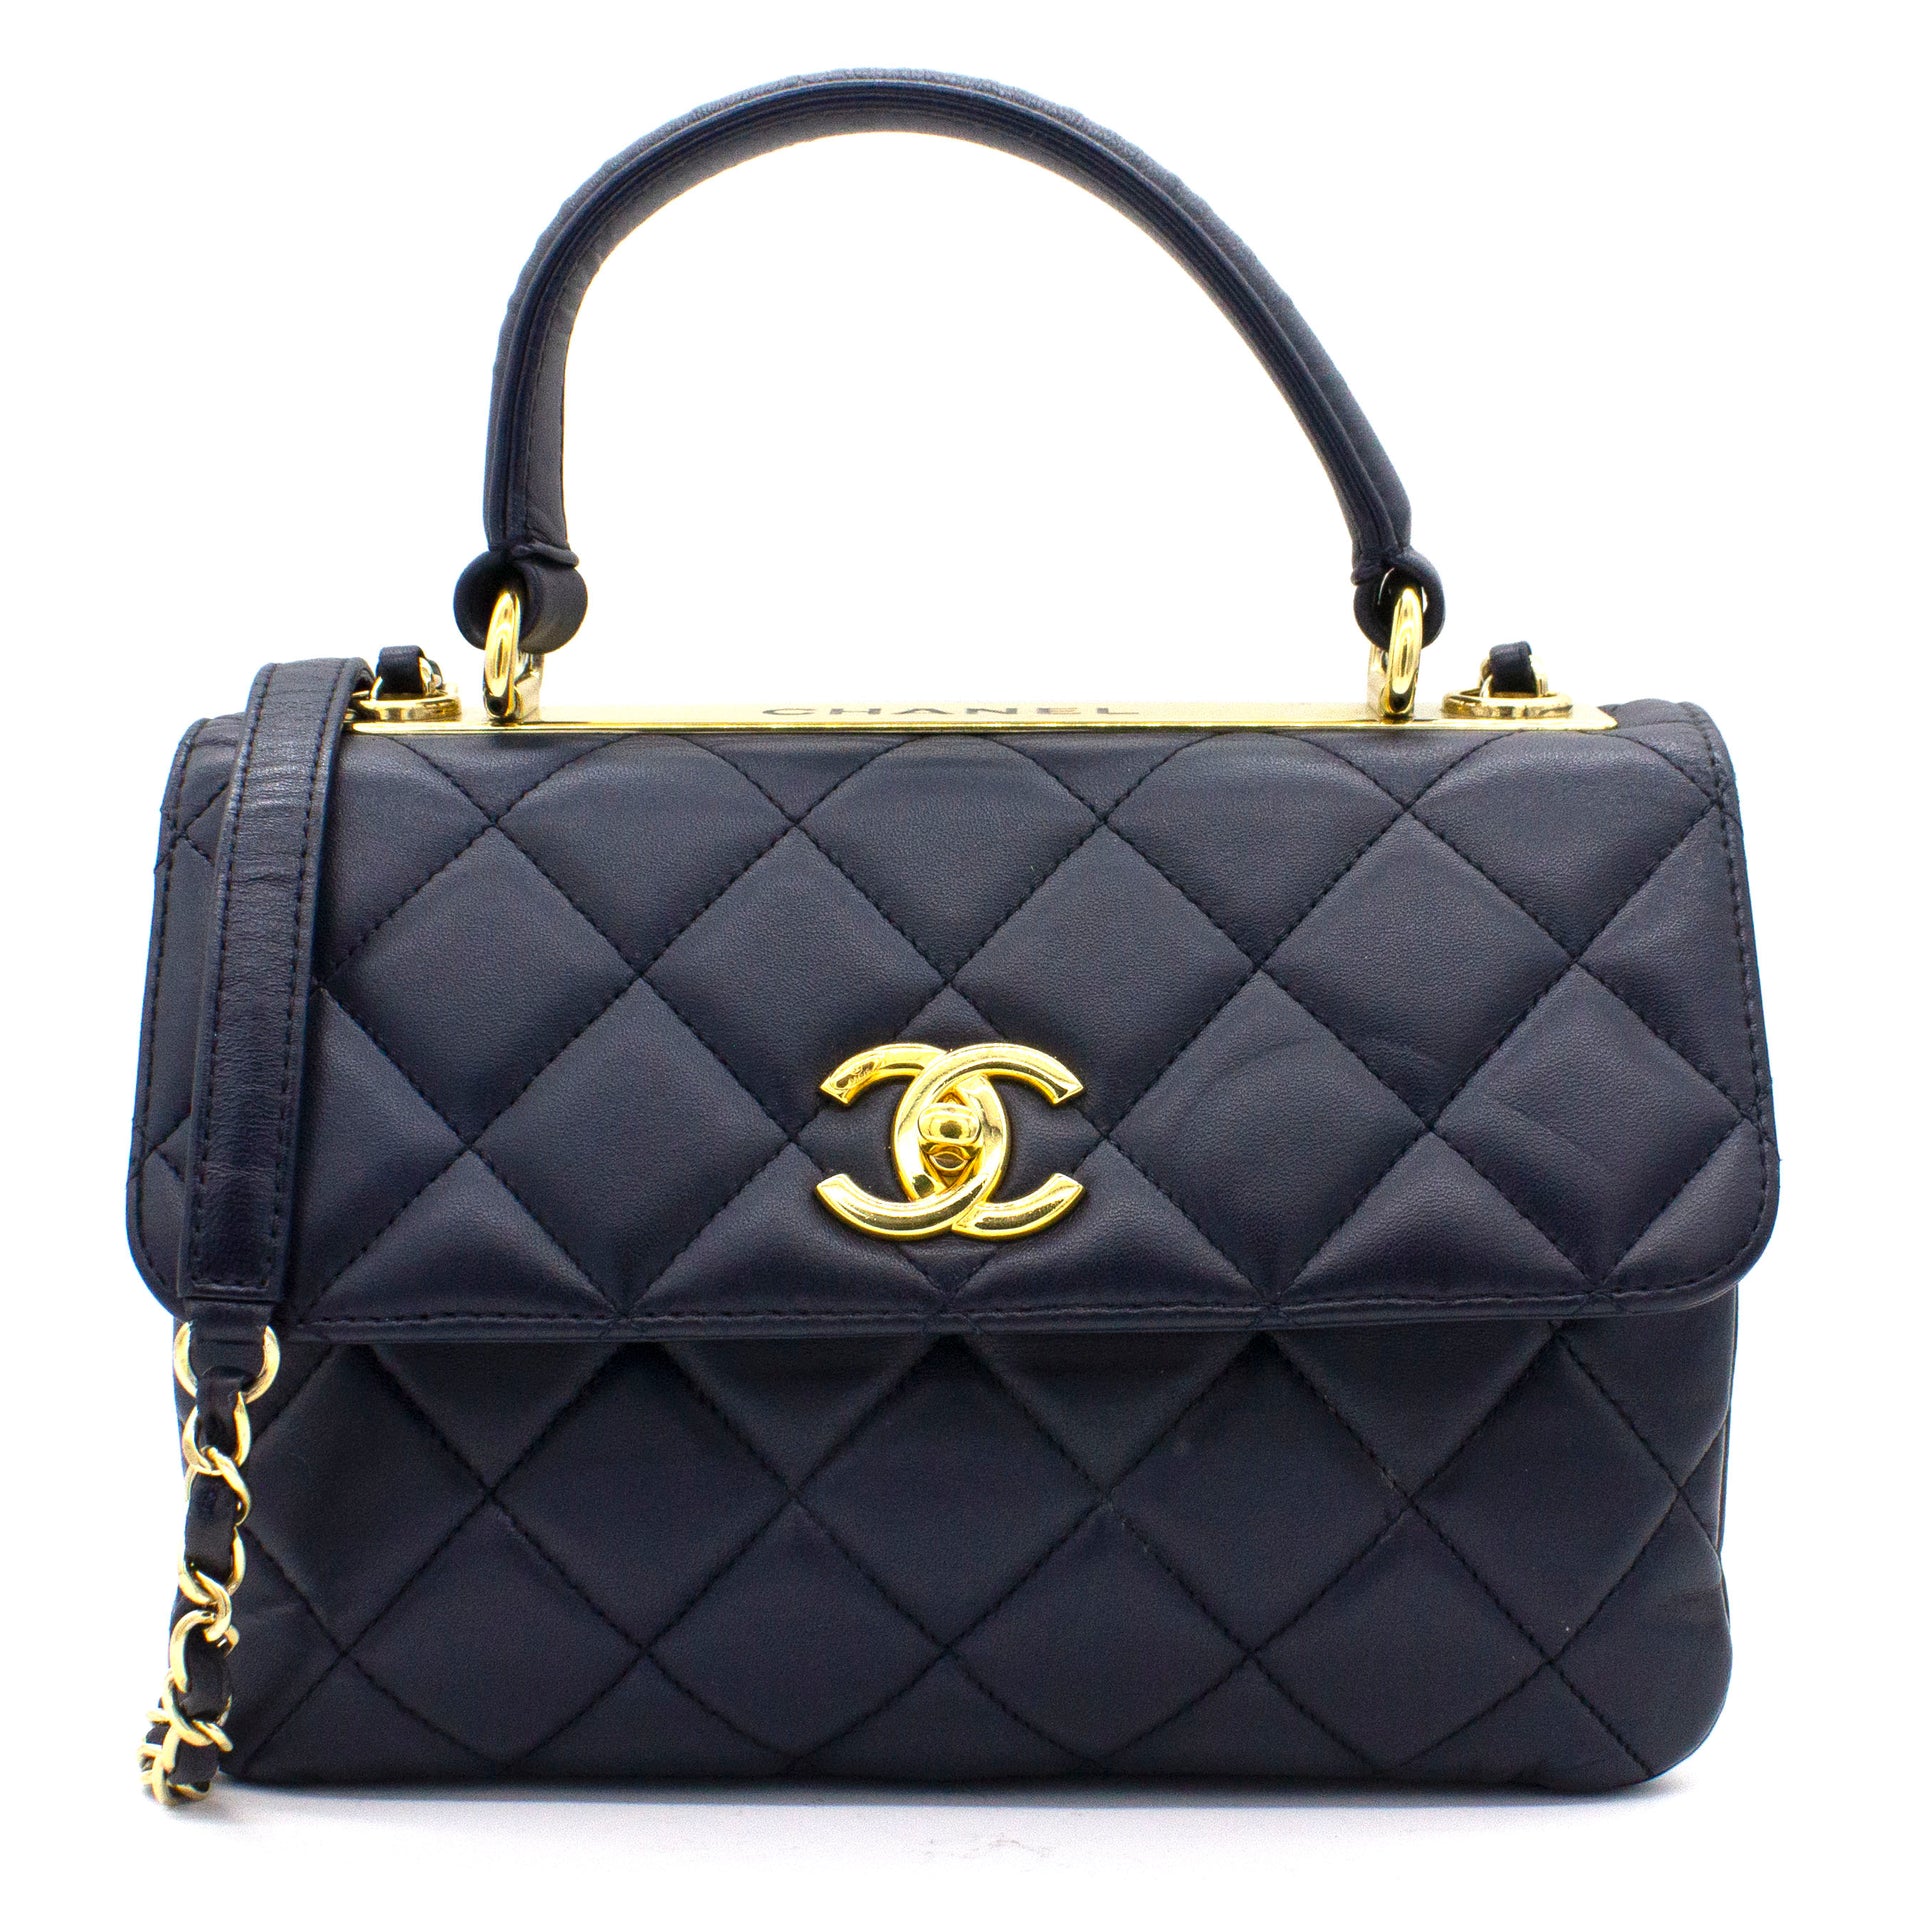 Preowned Chanel Flap Bag With Top Handle - Prestige Pawnbrokers